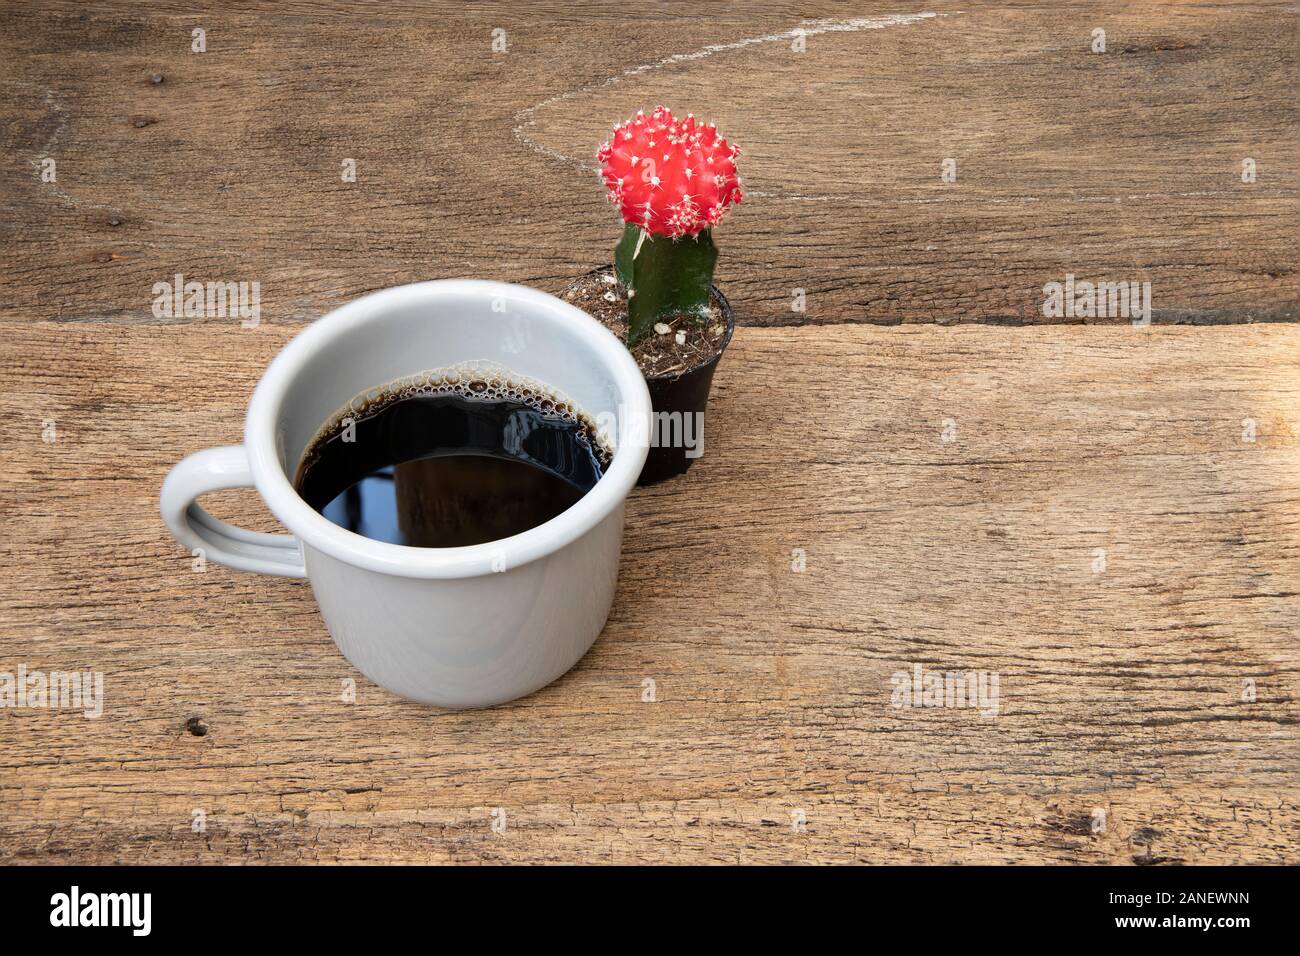 A tin cup of coffee on the wooden table background. Stock Photo